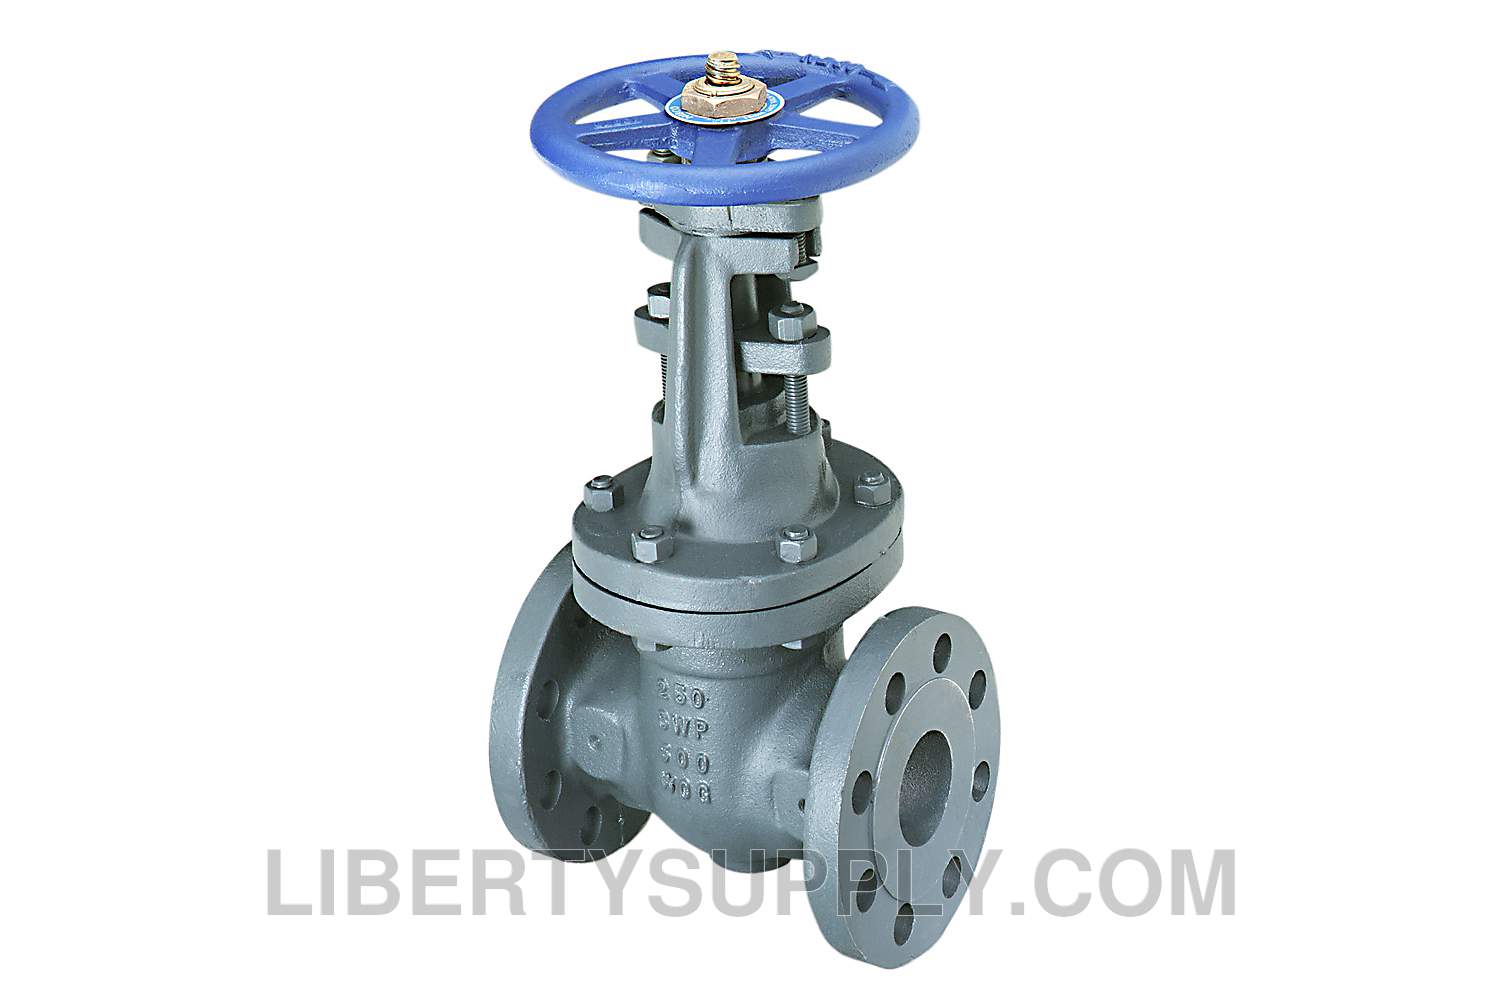 NIBCO F-617-ON 8 Flanged Cast Iron Gate Valve NHA3LJL